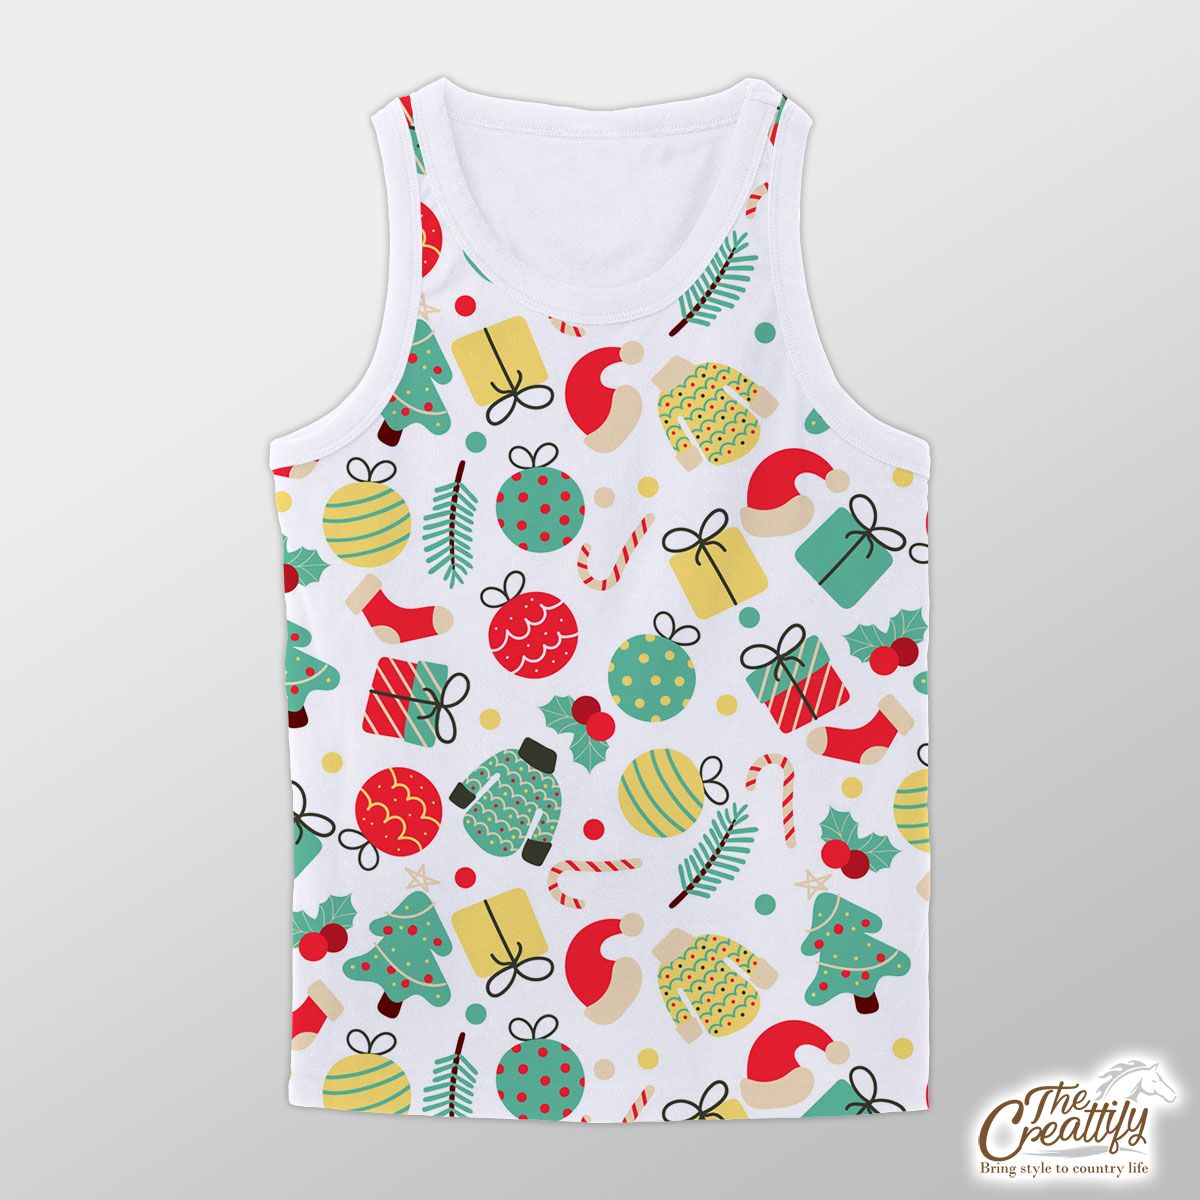 Christmas Gifts, Balls, Santa Hat, Red Socks, Candy Canes, Pattern Unisex Tank Top